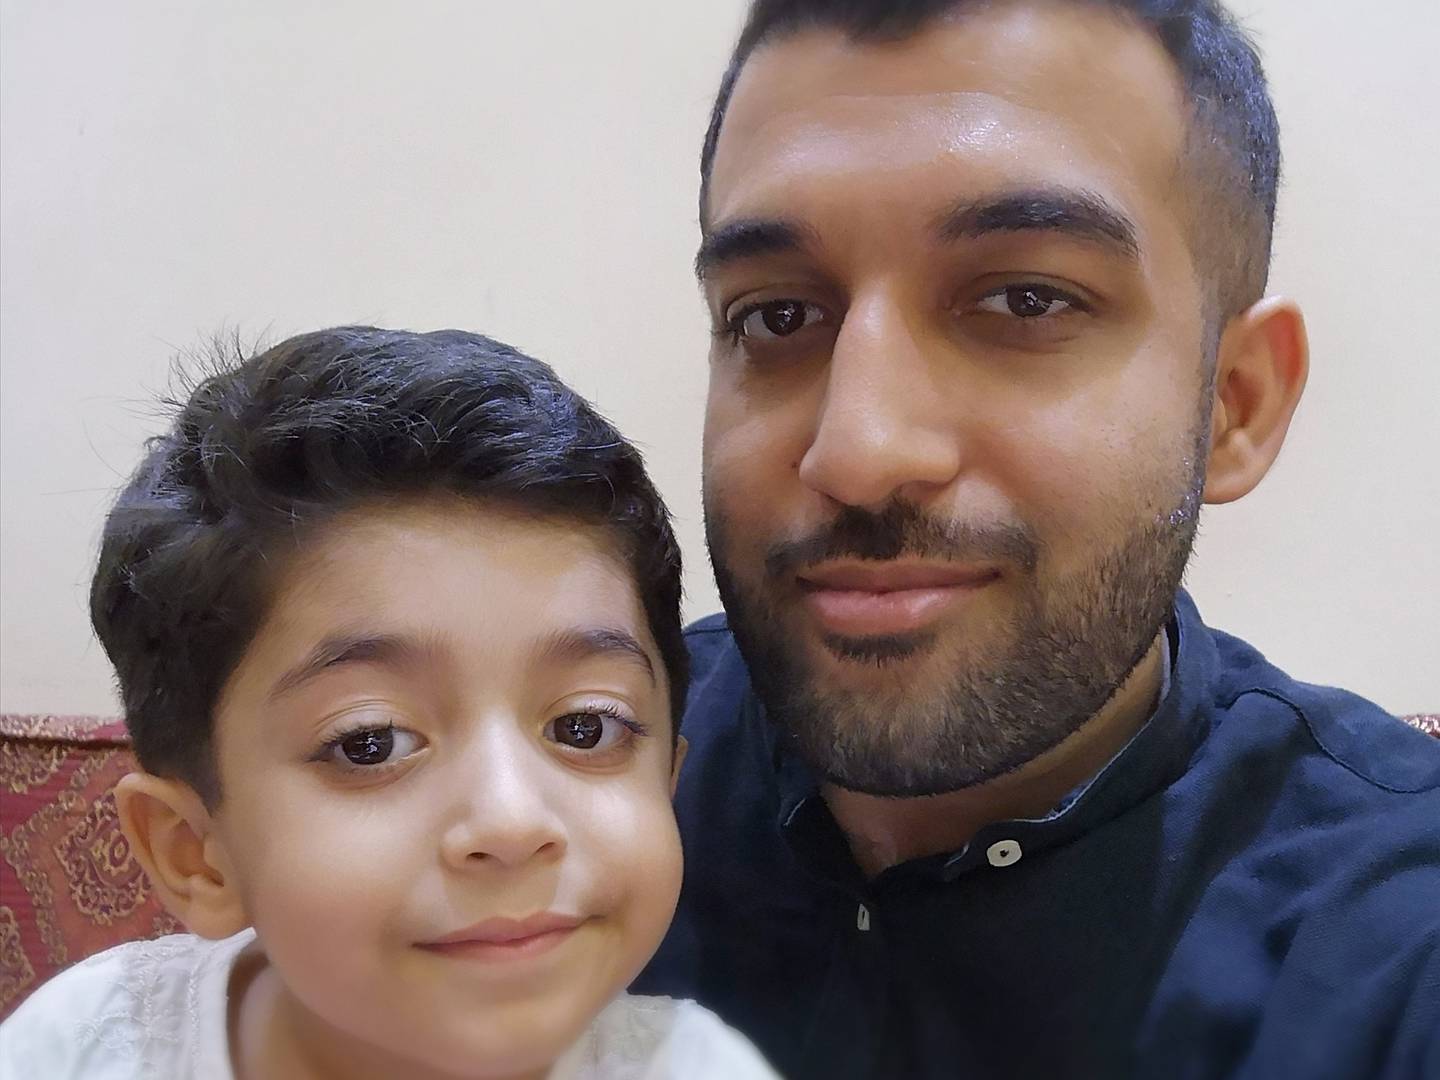 Rizwan Hassan says he feels a 'mixed bag of emotions' at the thought of his son Rayyan, 3, starting school during the pandemic